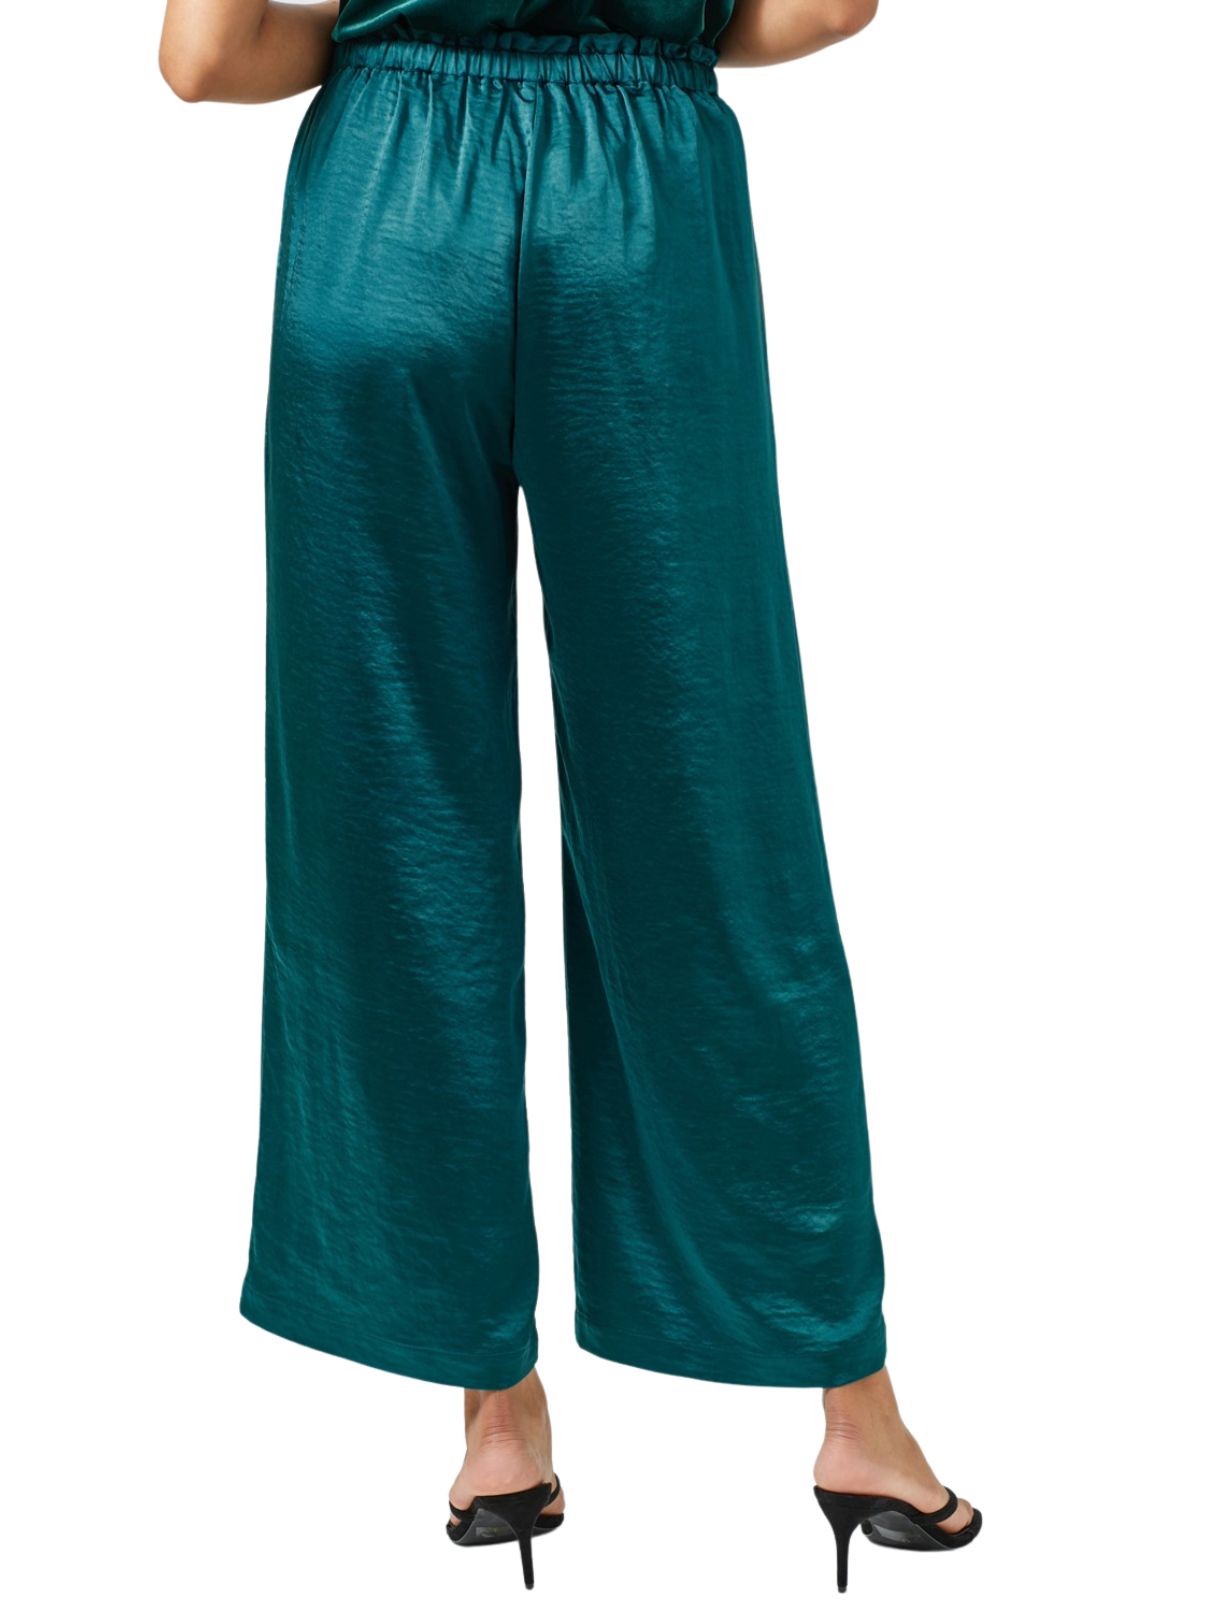 silky wide leg satin pant in teal